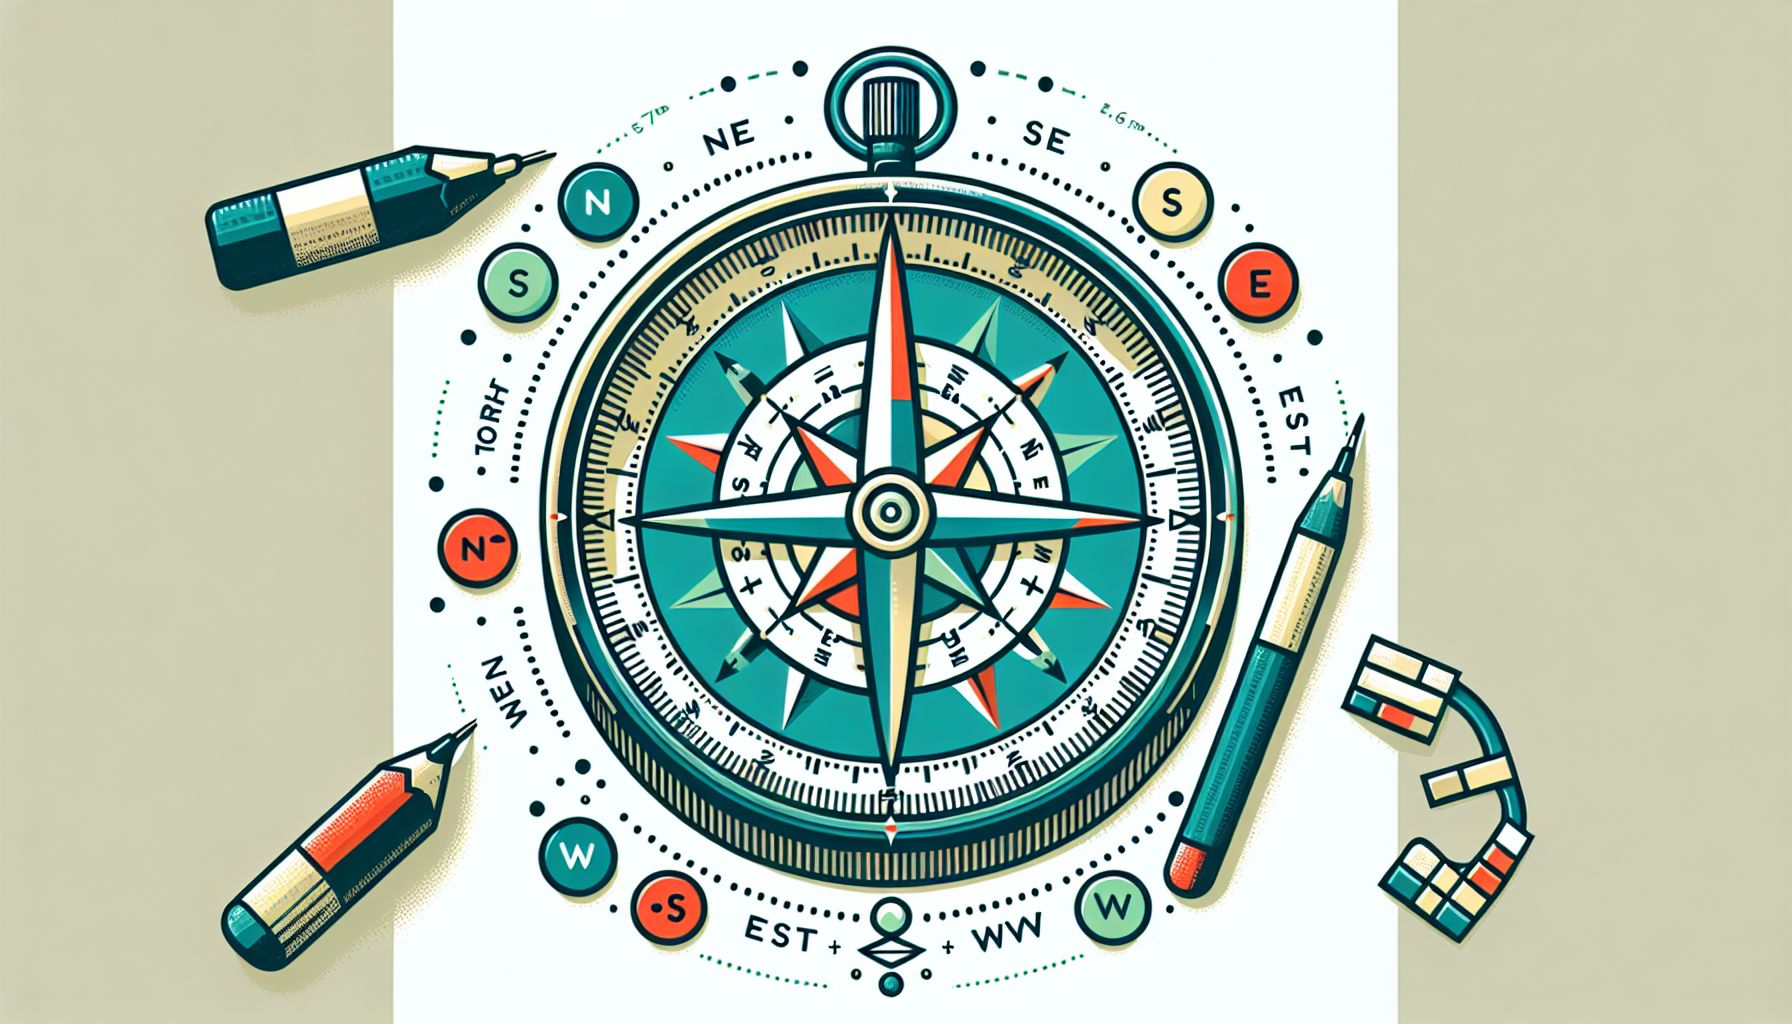 Compass in flat illustration style and white background, red #f47574, green #88c7a8, yellow #fcc44b, and blue #645bc8 colors.